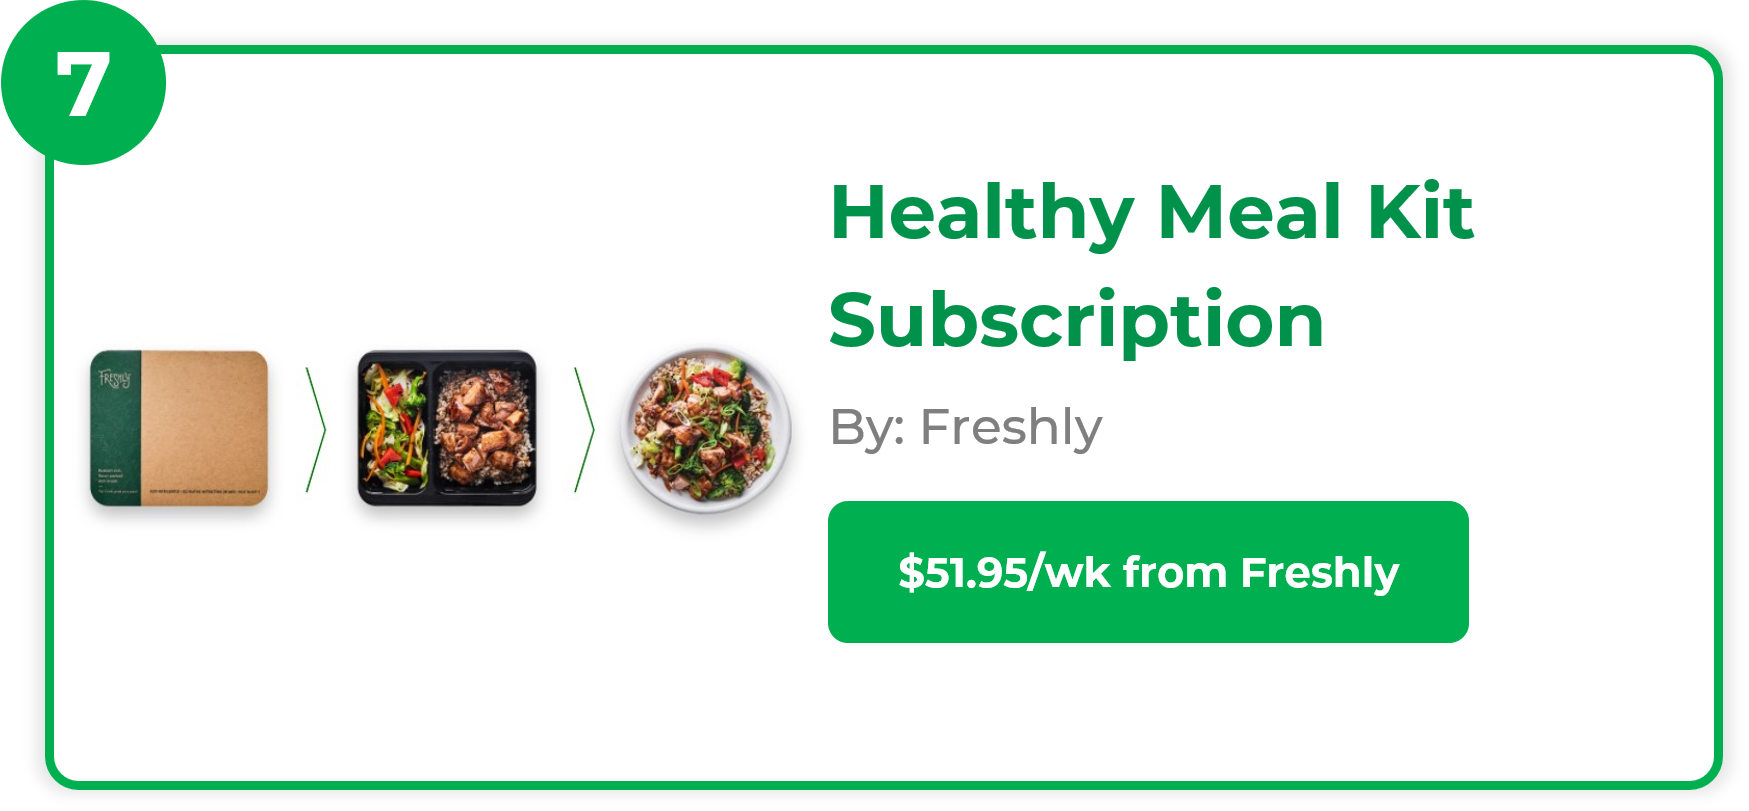 Healthy Meal Kit Subscription - Freshly